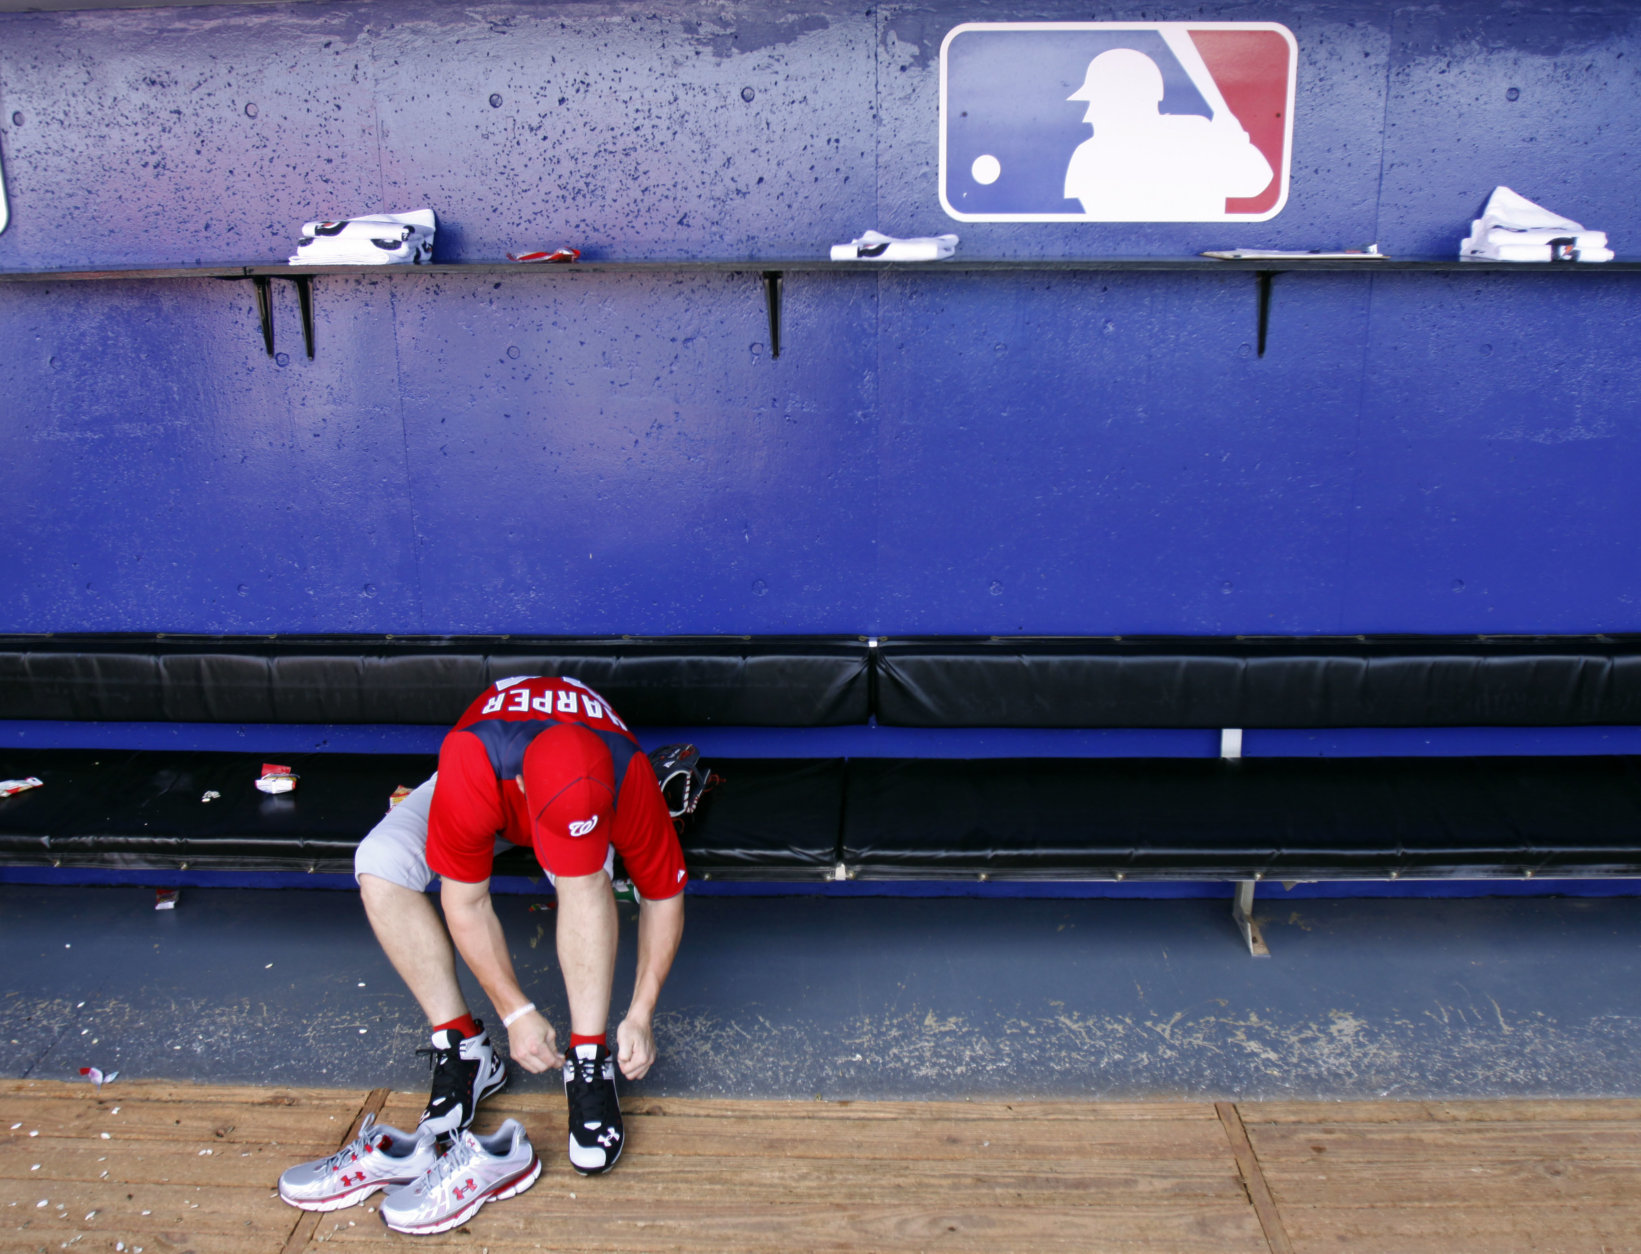 Washington Nationals' Bryce Harper ties his shoe in the dugout before the start of a spring training baseball game against the New York Mets Monday, Feb. 28, 2011, in Port St. Lucie, Fla. (AP Photo/Jeff Roberson)